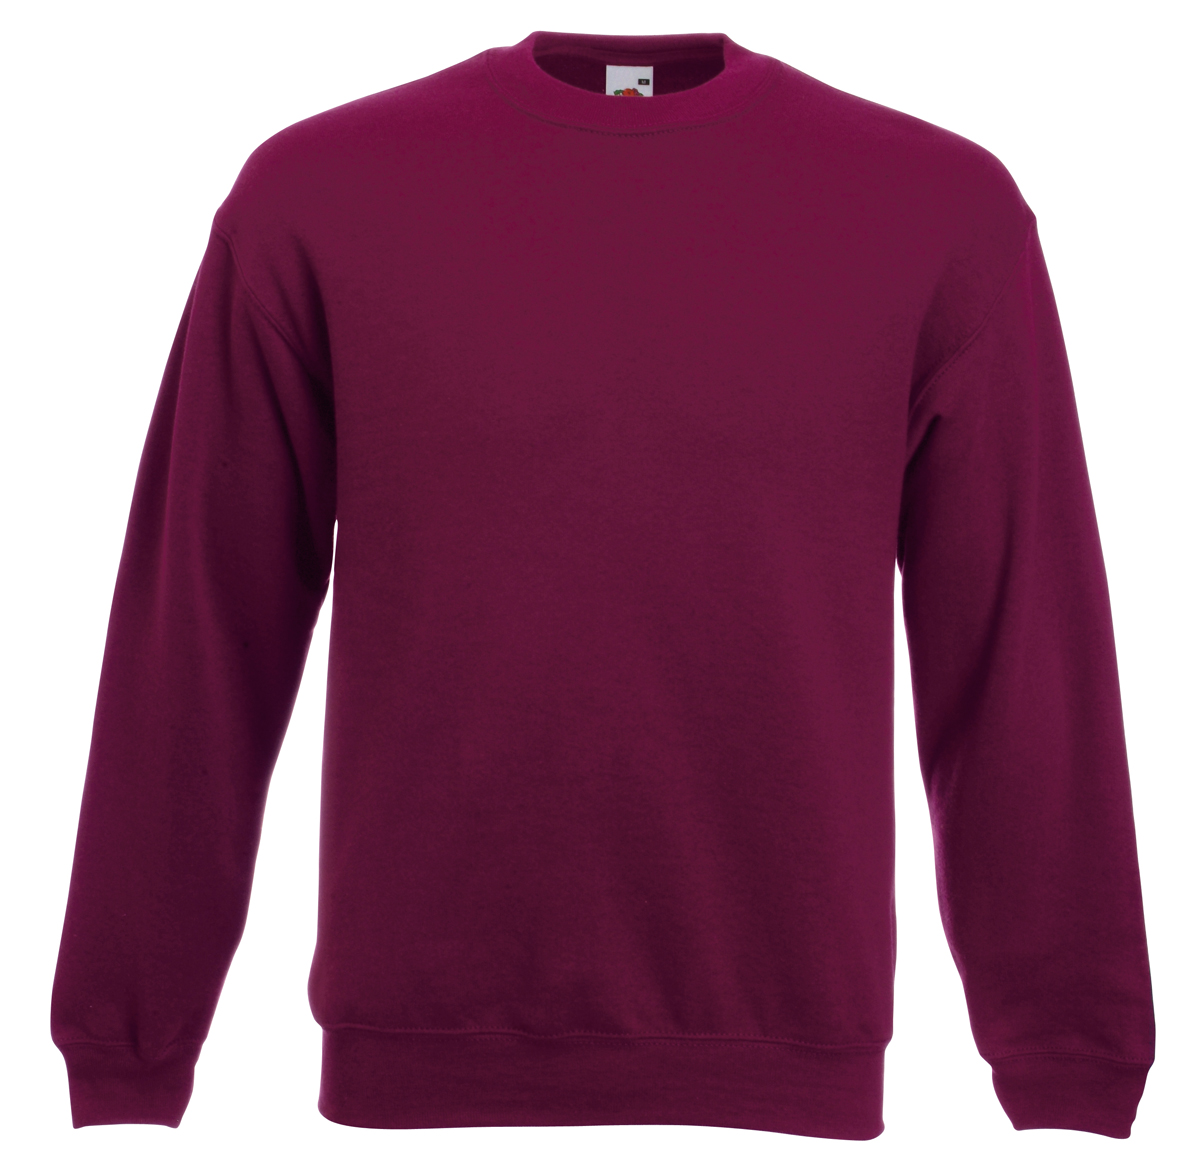 Fruit of the Loom Set-In Sweater 622020 Burgundy